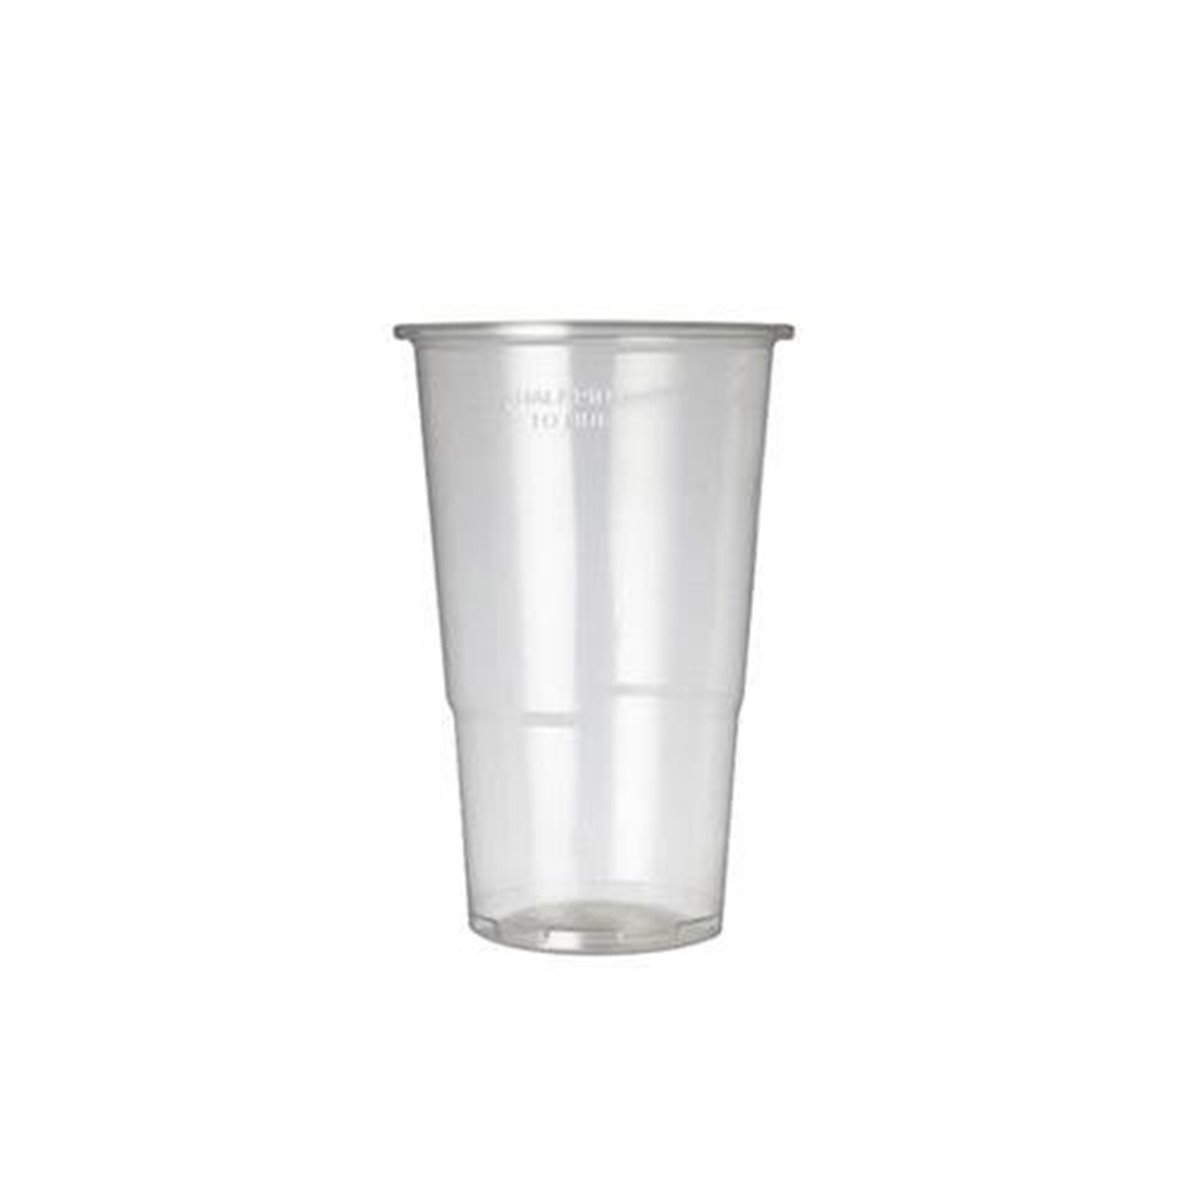 RY Caterpack Plastic Glass [Clear] Half Pint - 50x28cl glasses